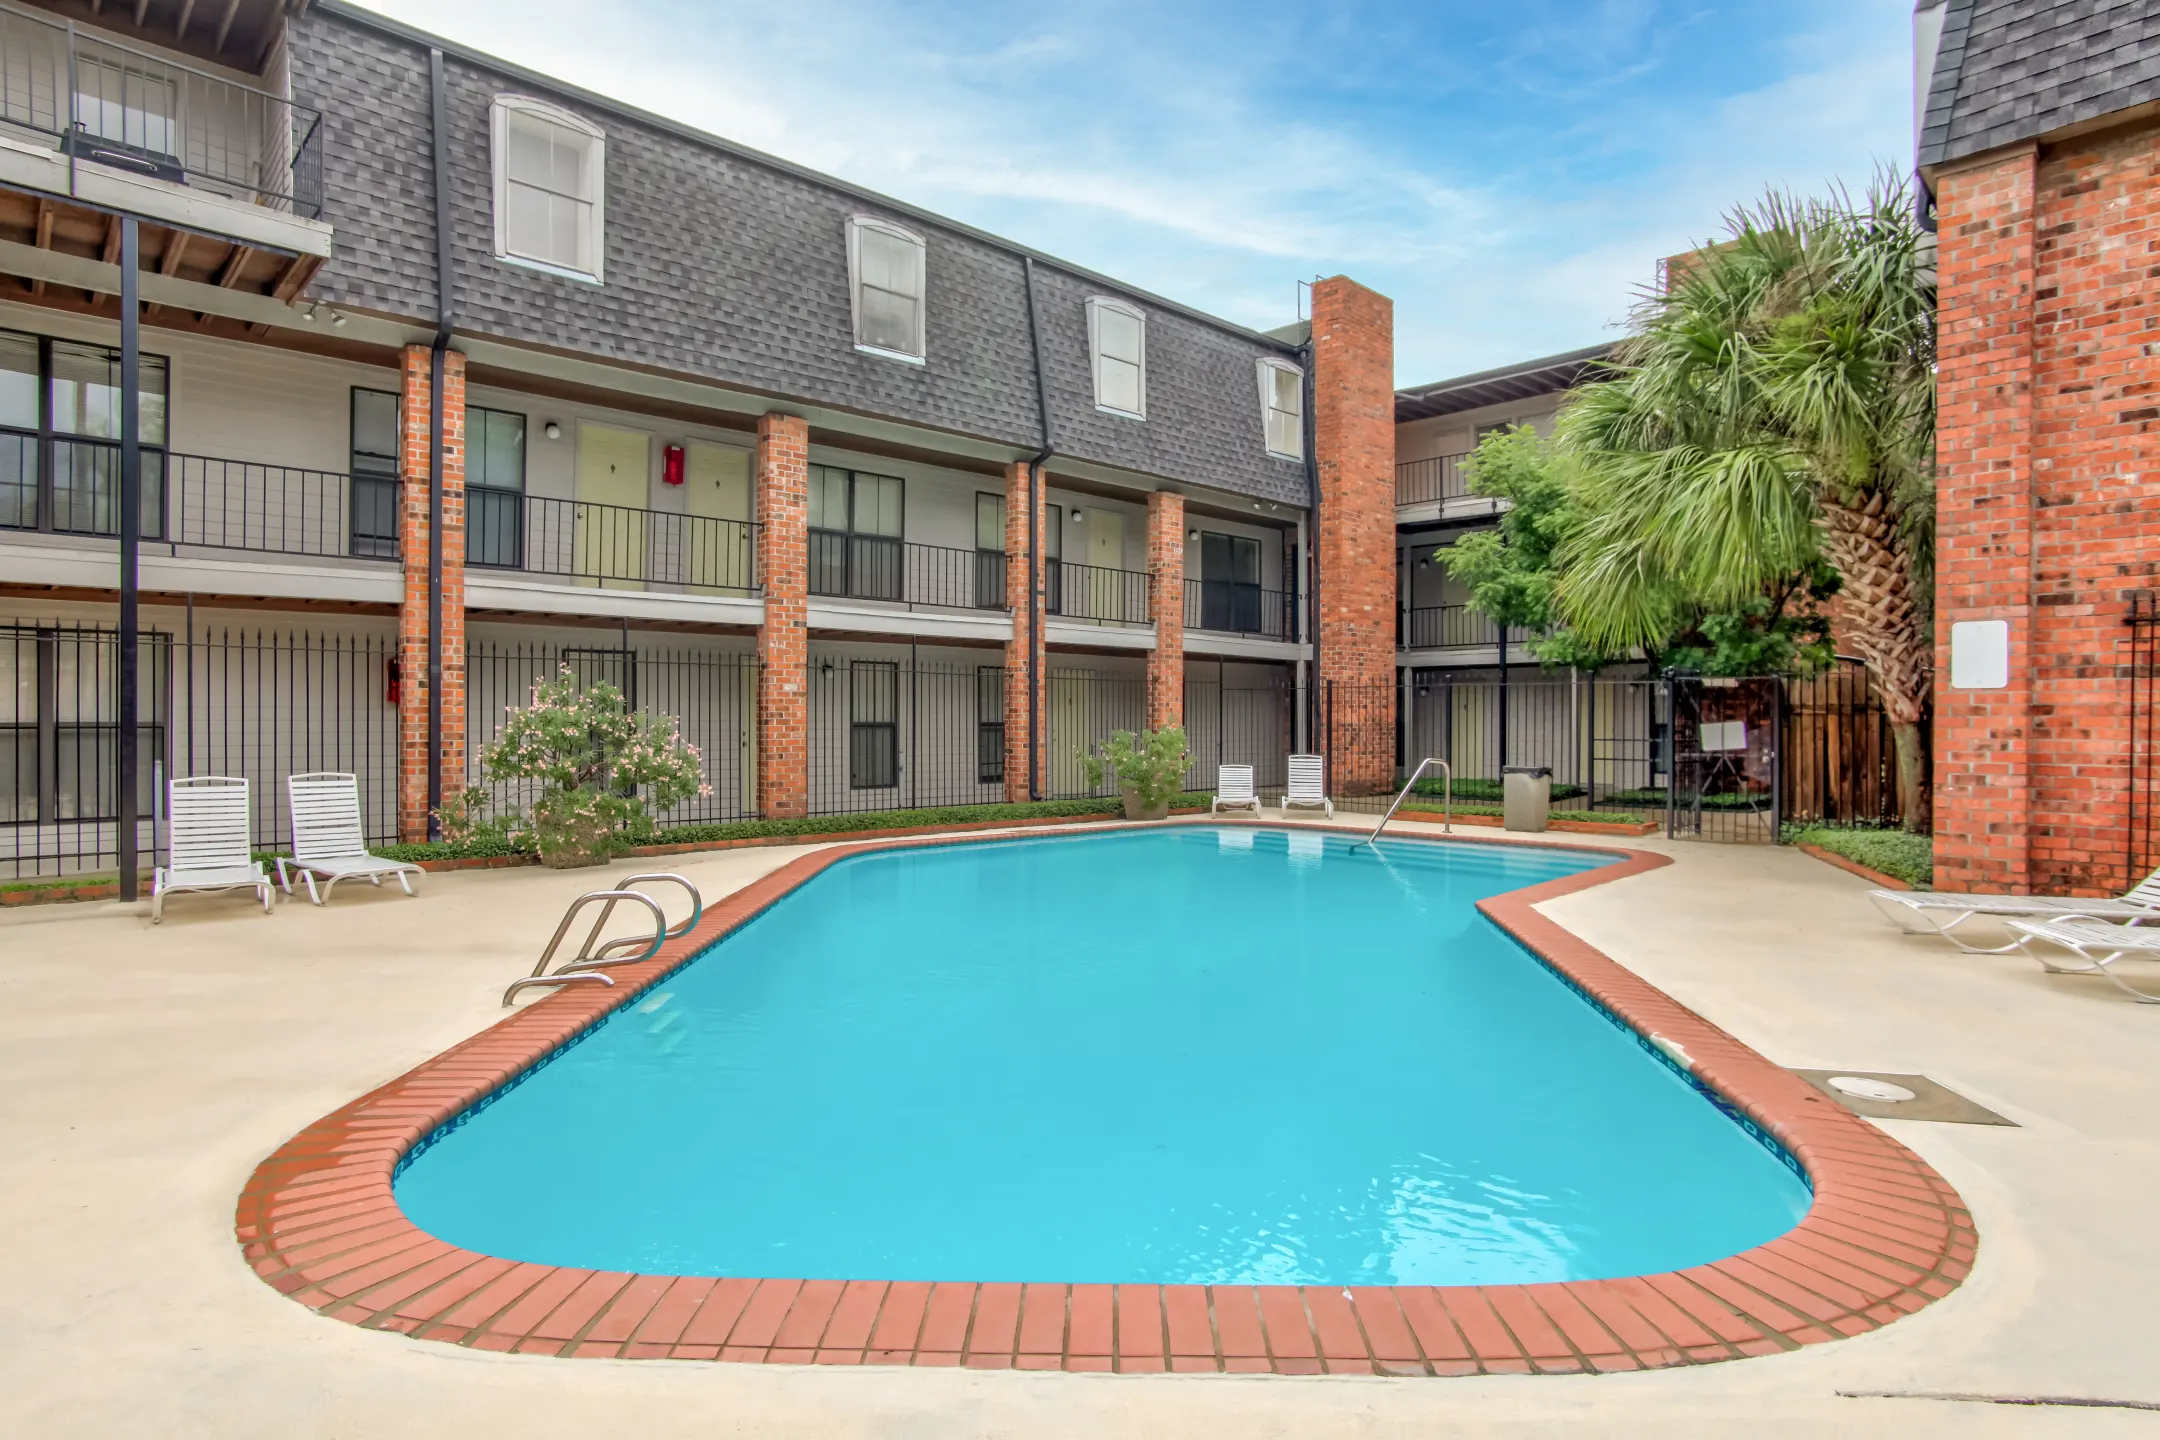 Pool - Cypress Trace Apartments - New Orleans, LA